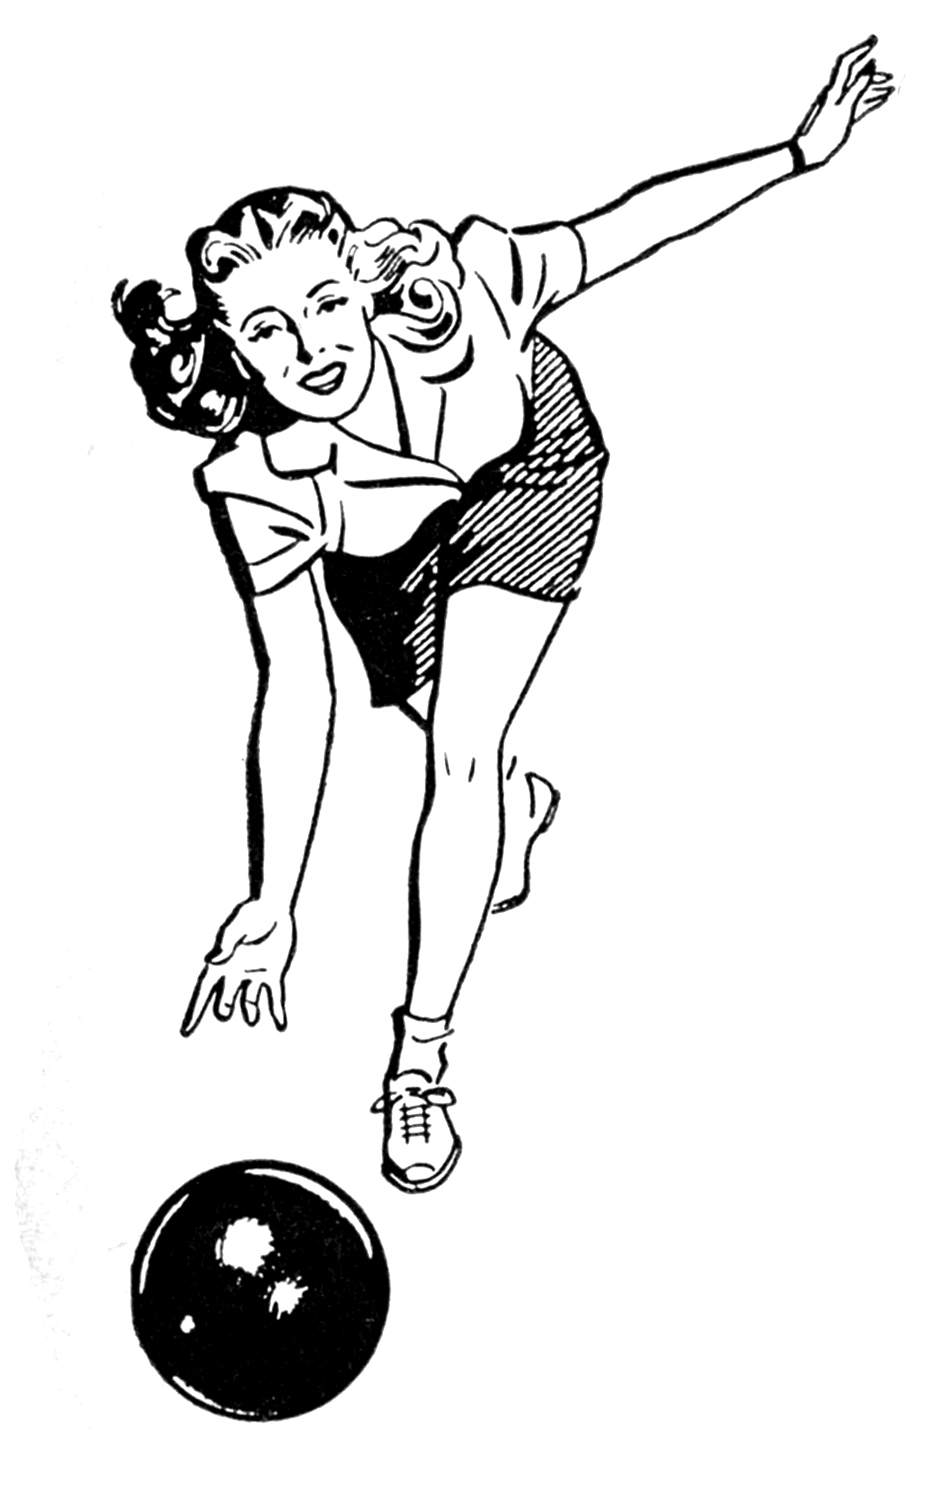 Retro clip art woman and man bowling the graphics fairy 2